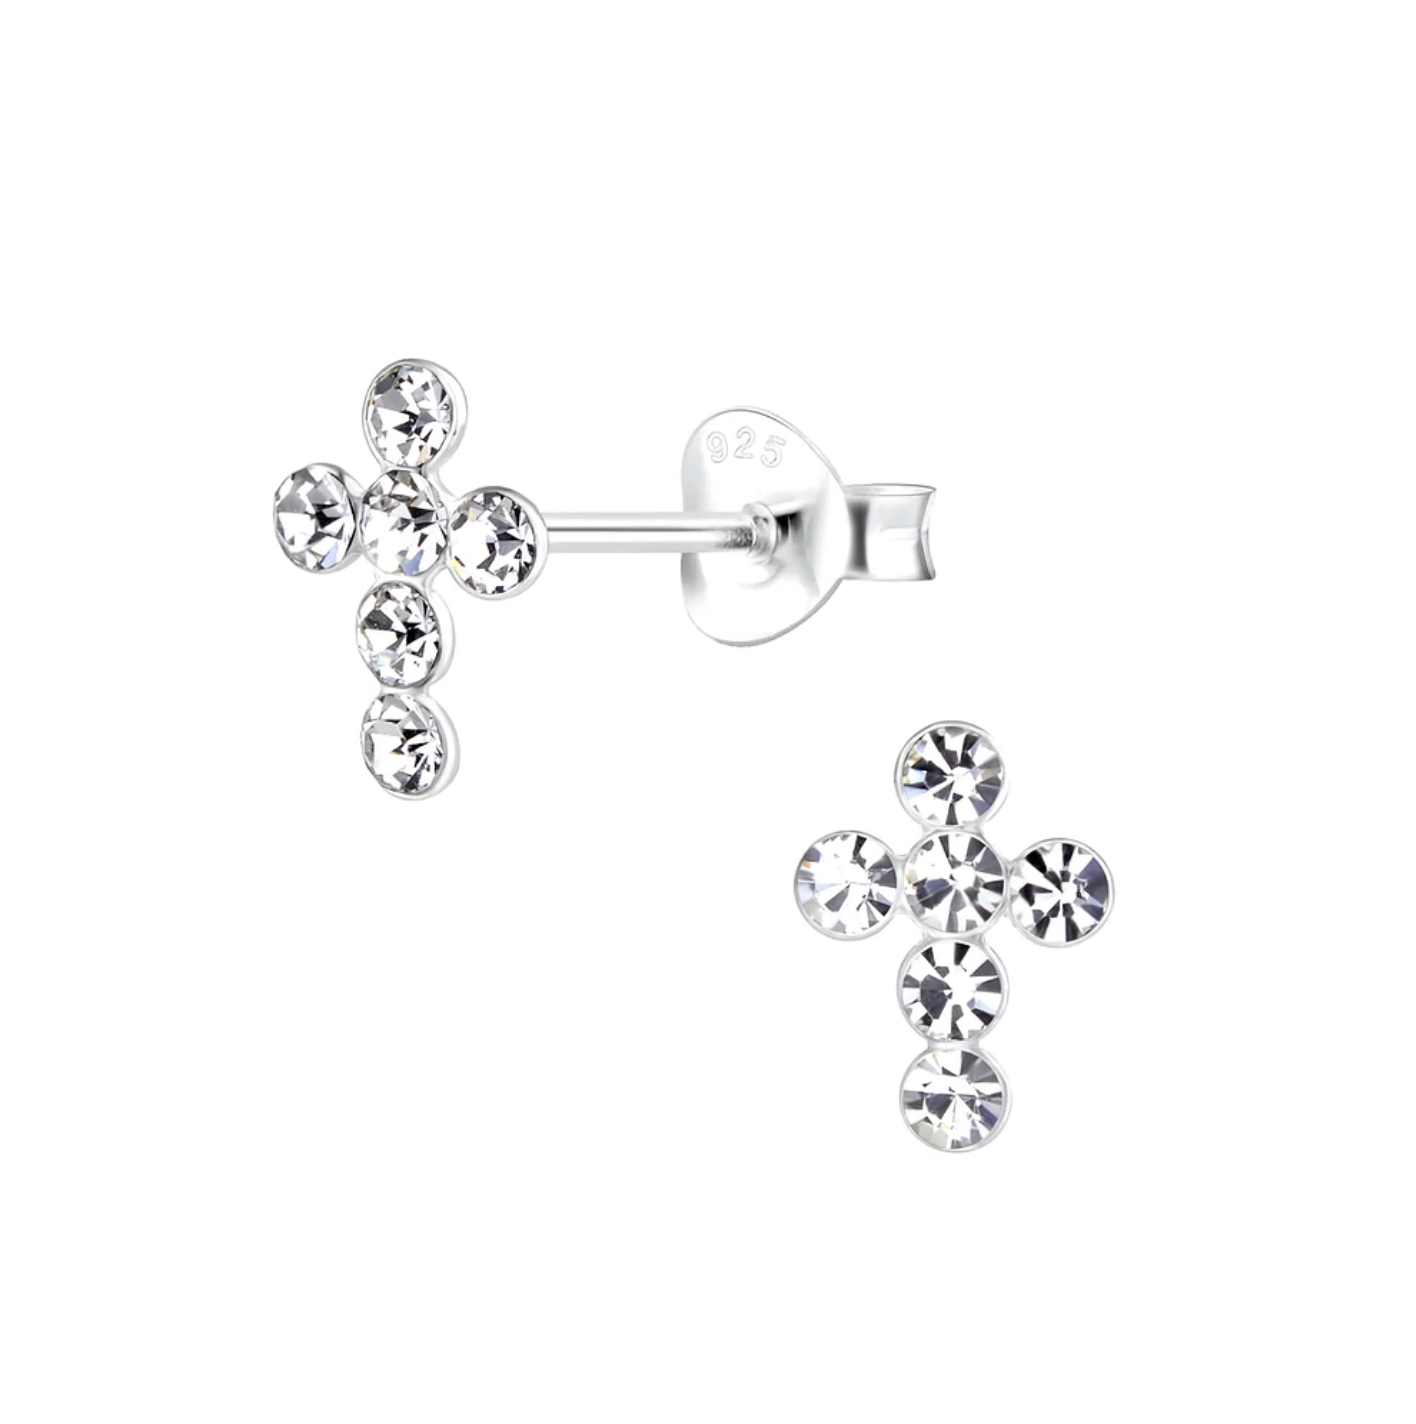 The Lucy Nash Ruth Studs are dainty yet still including gorgeous details.